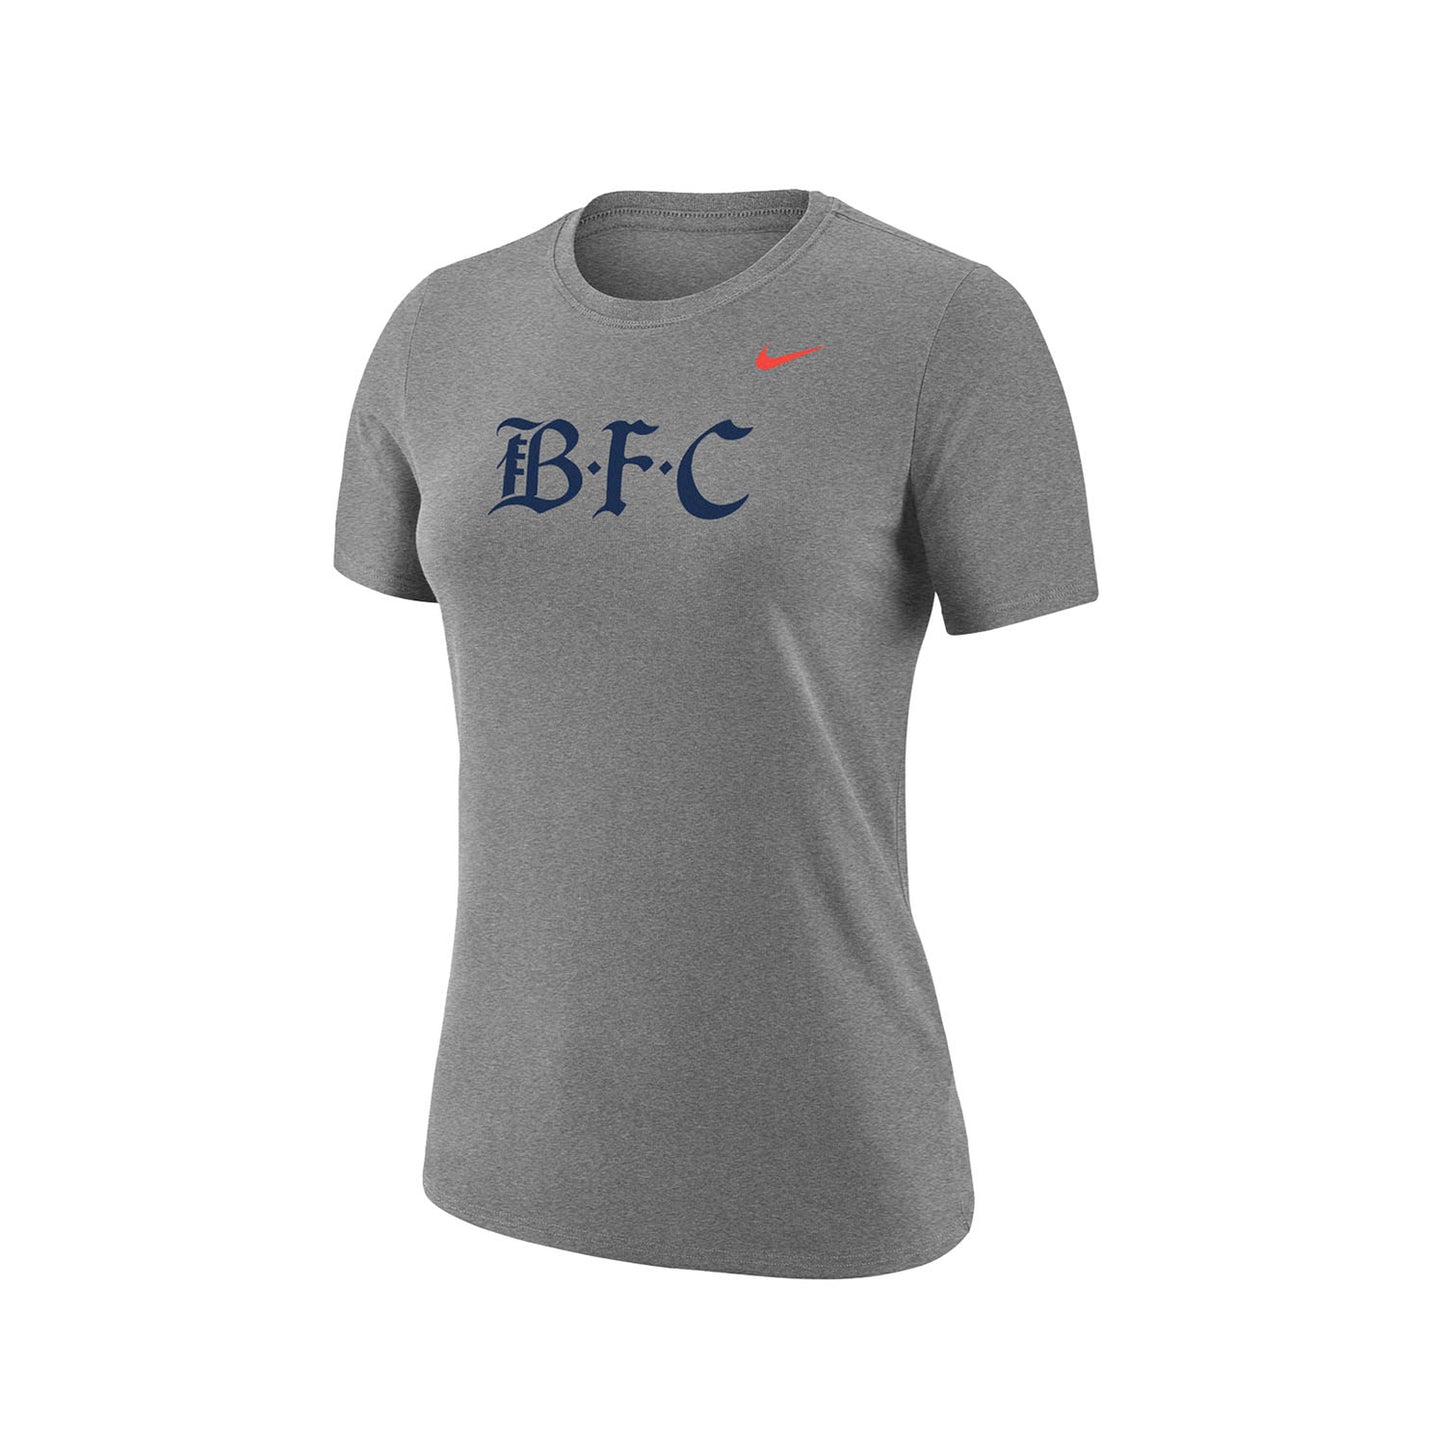 Women's Nike Bay FC Heathered Grey Tee - Front View